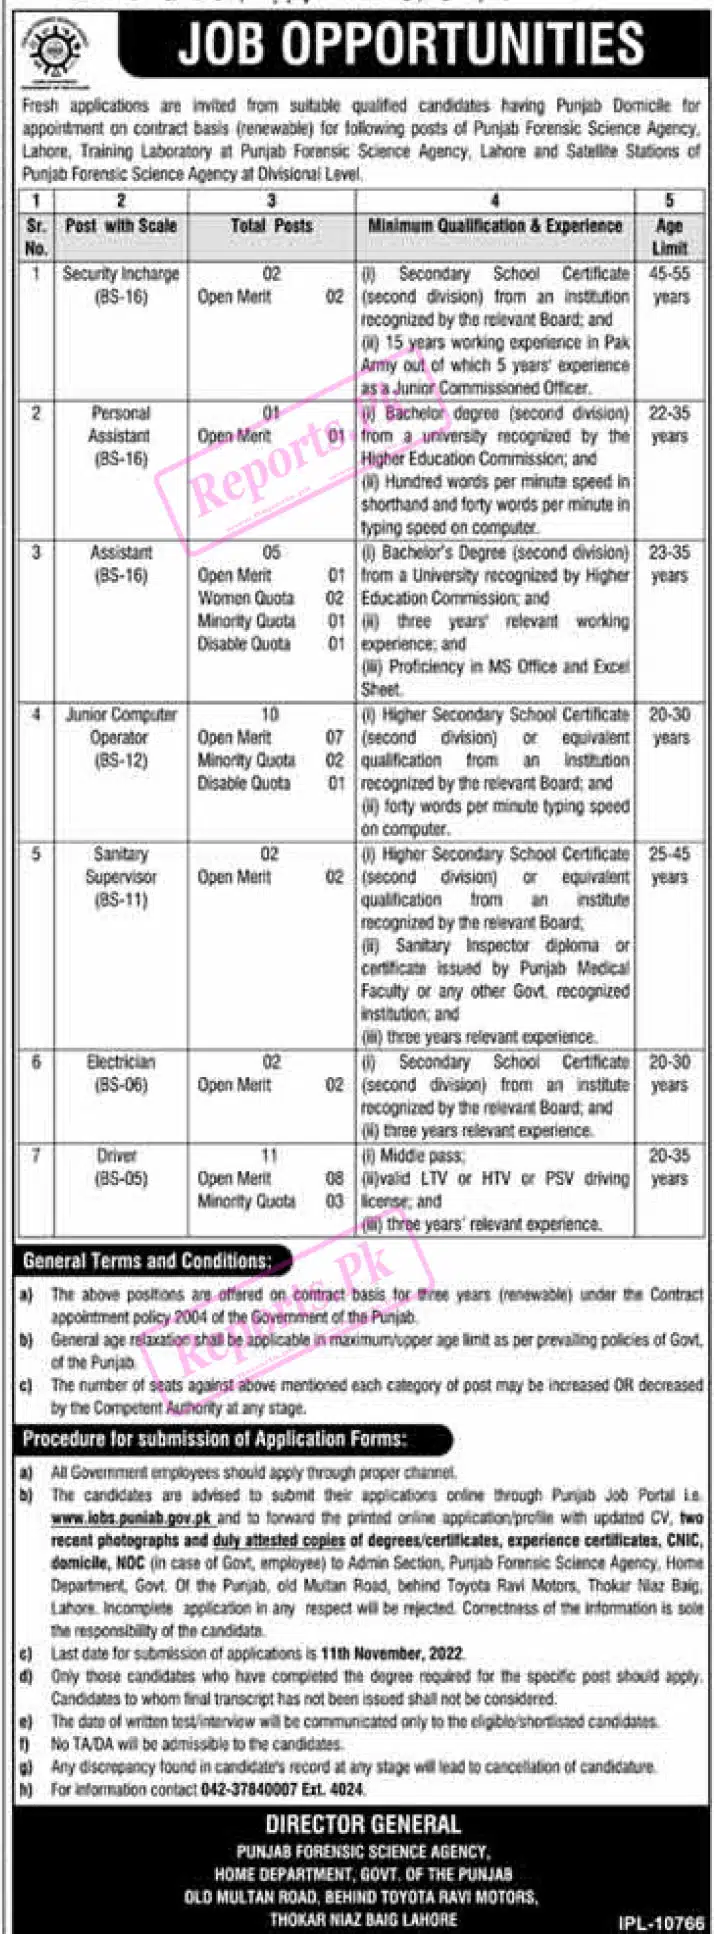 Latest Recruitment of Punjab Forensic Science Agency PFSA